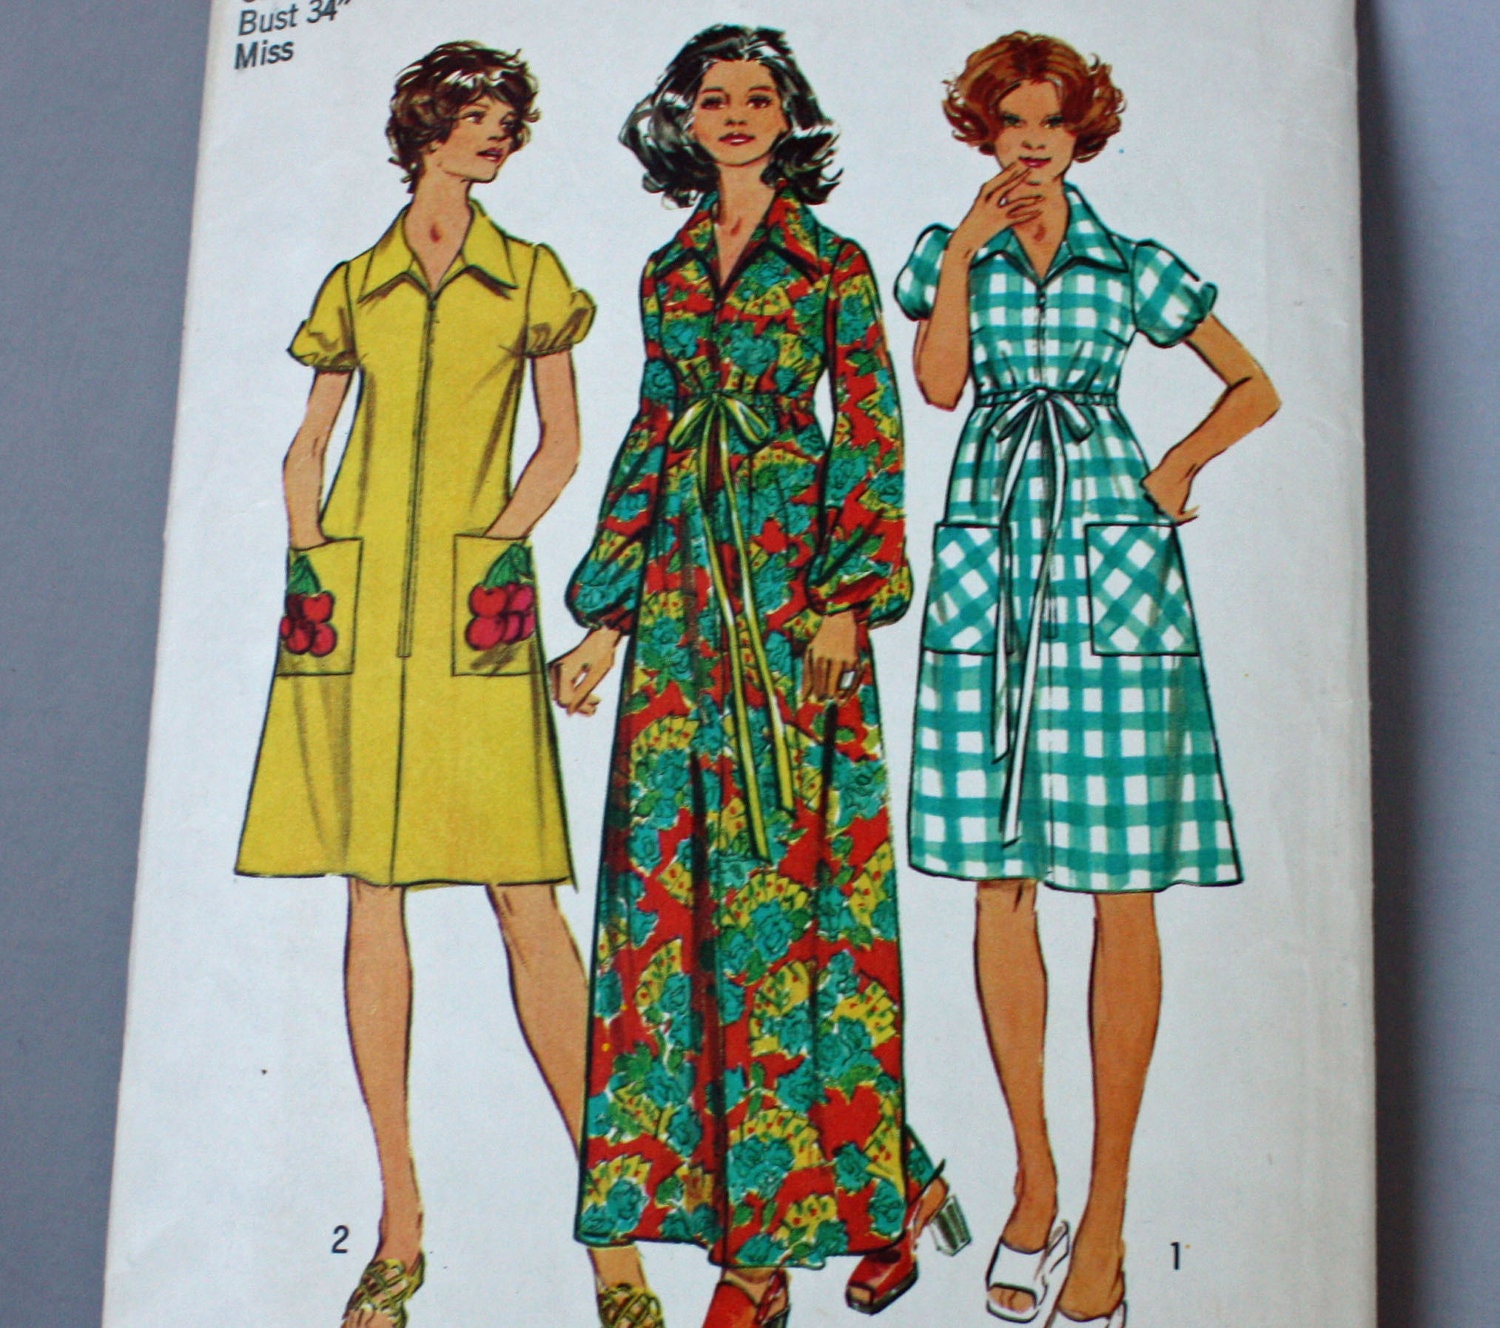 Vintage 1970s Sewing Pattern Simplicity 5365 by Old2NewMemories